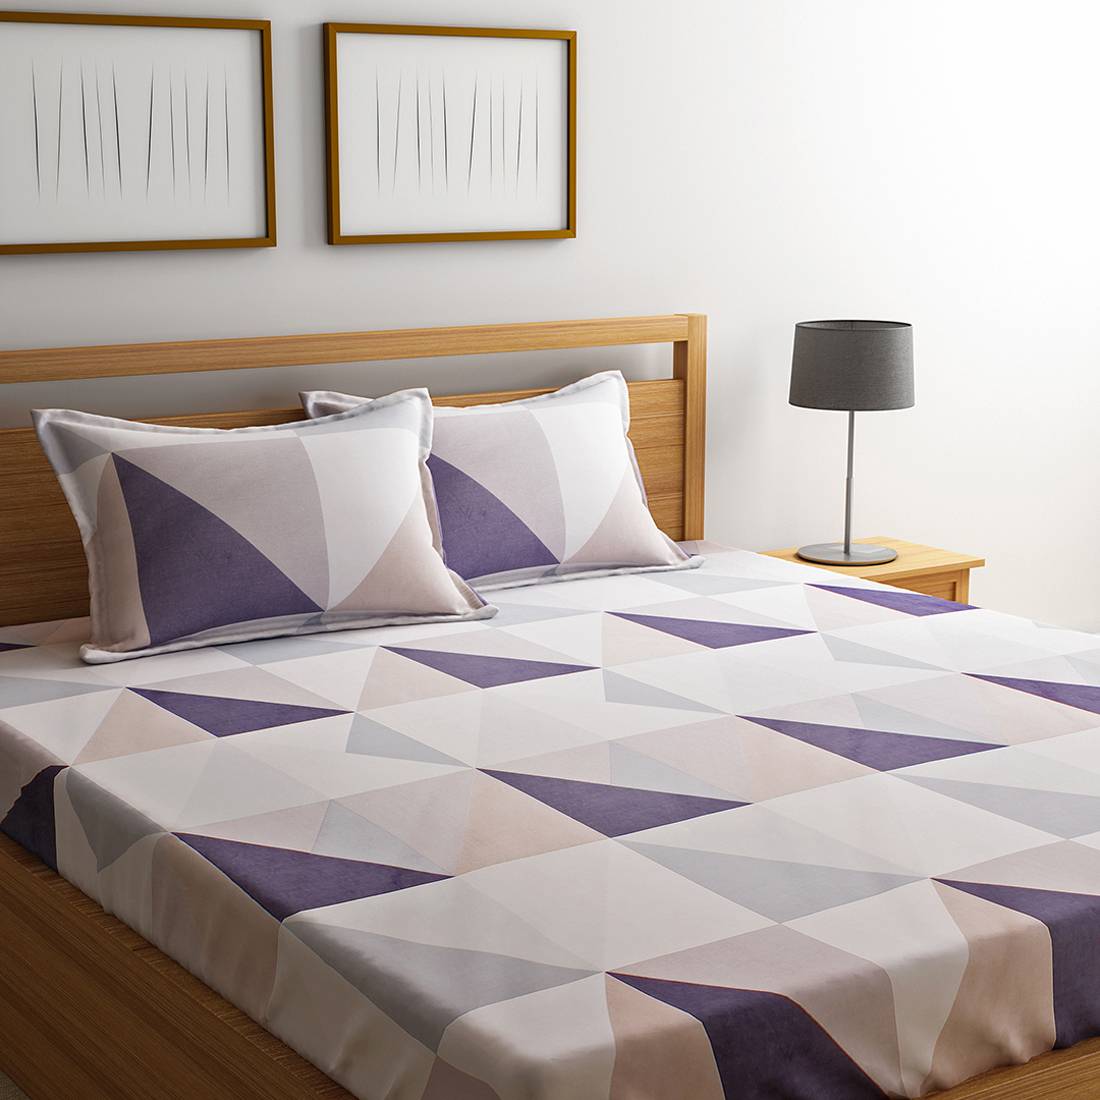 Up to 70% off on Bedsheets | Full House Sale - Urban Ladder